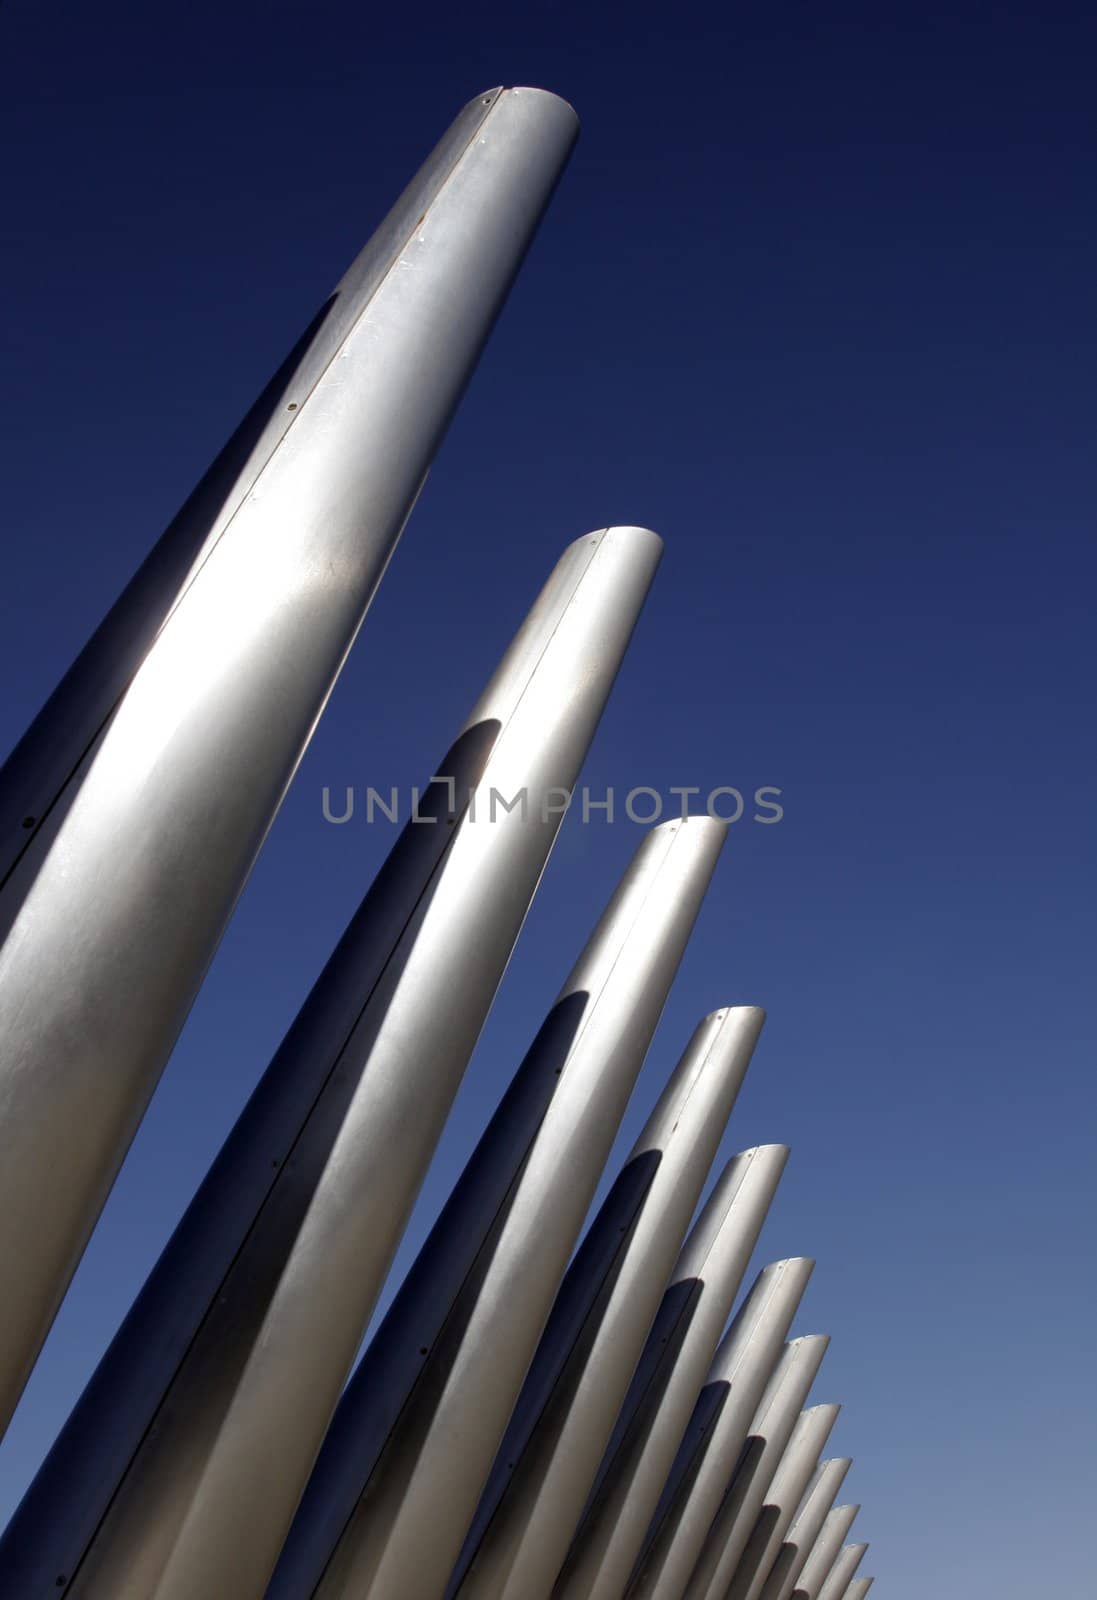 Modern Architectural Sculpture Made Of Pipes In Front Of A Clear Blue Sky, Sydney, Australia